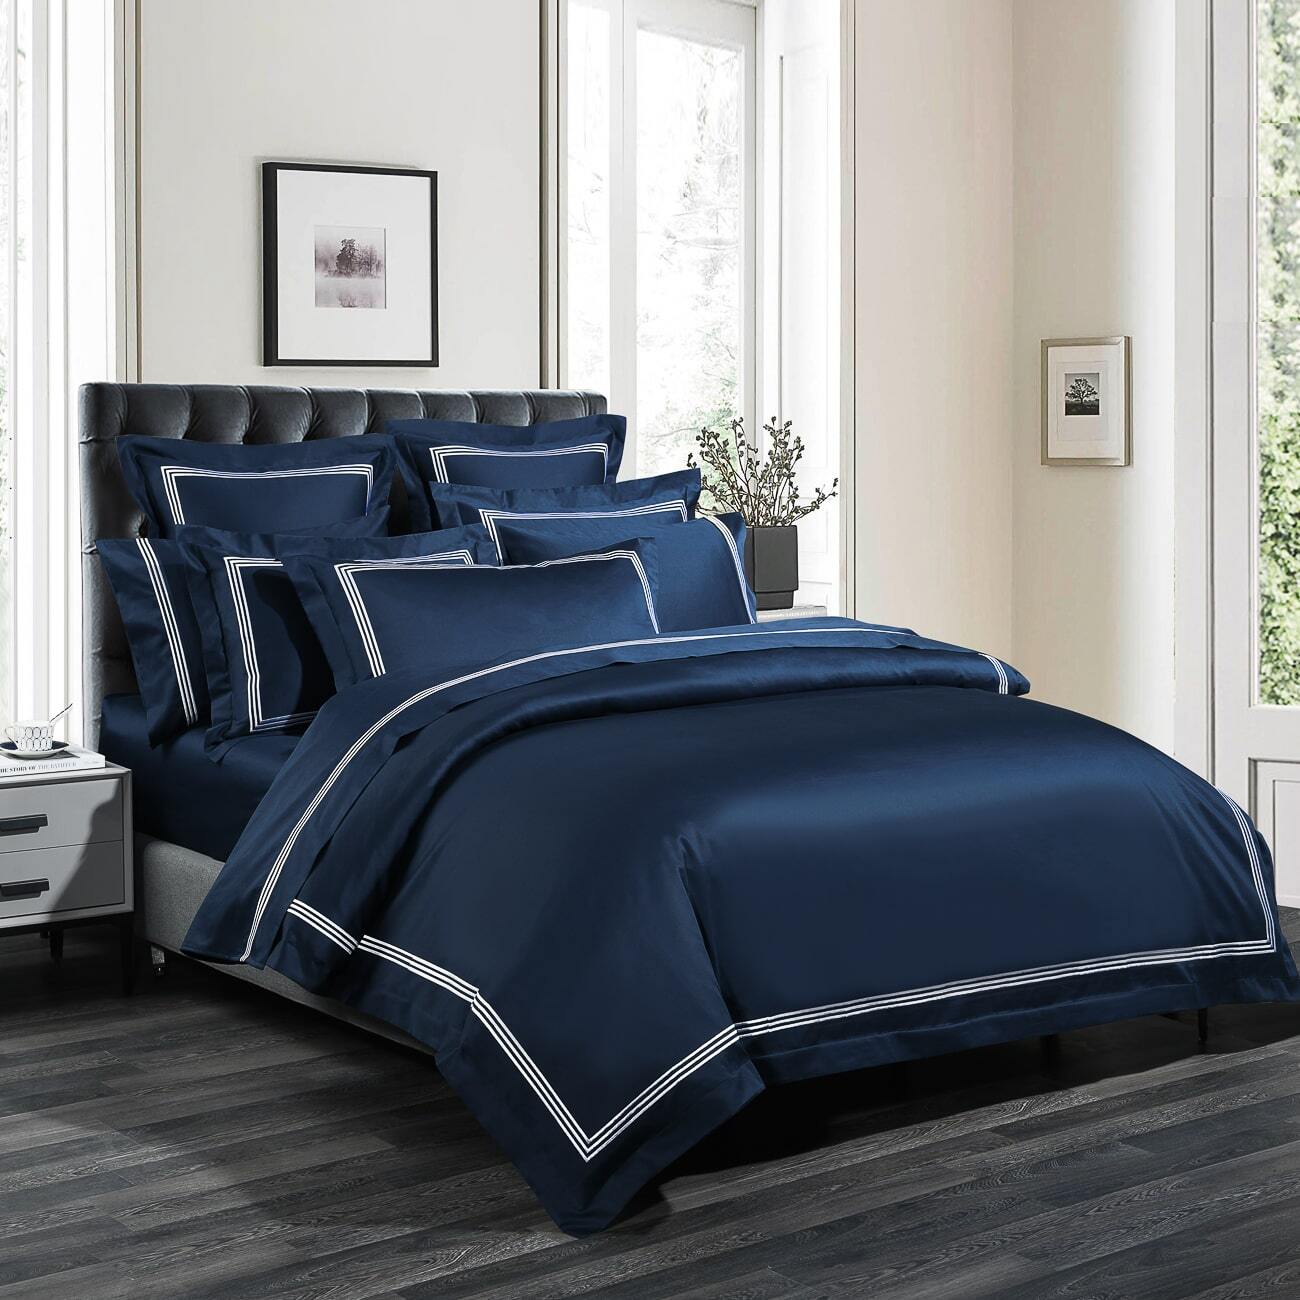 Hotel Luxe - White Embroidery on Navy Blue - 1000TC Quilt Cover Set